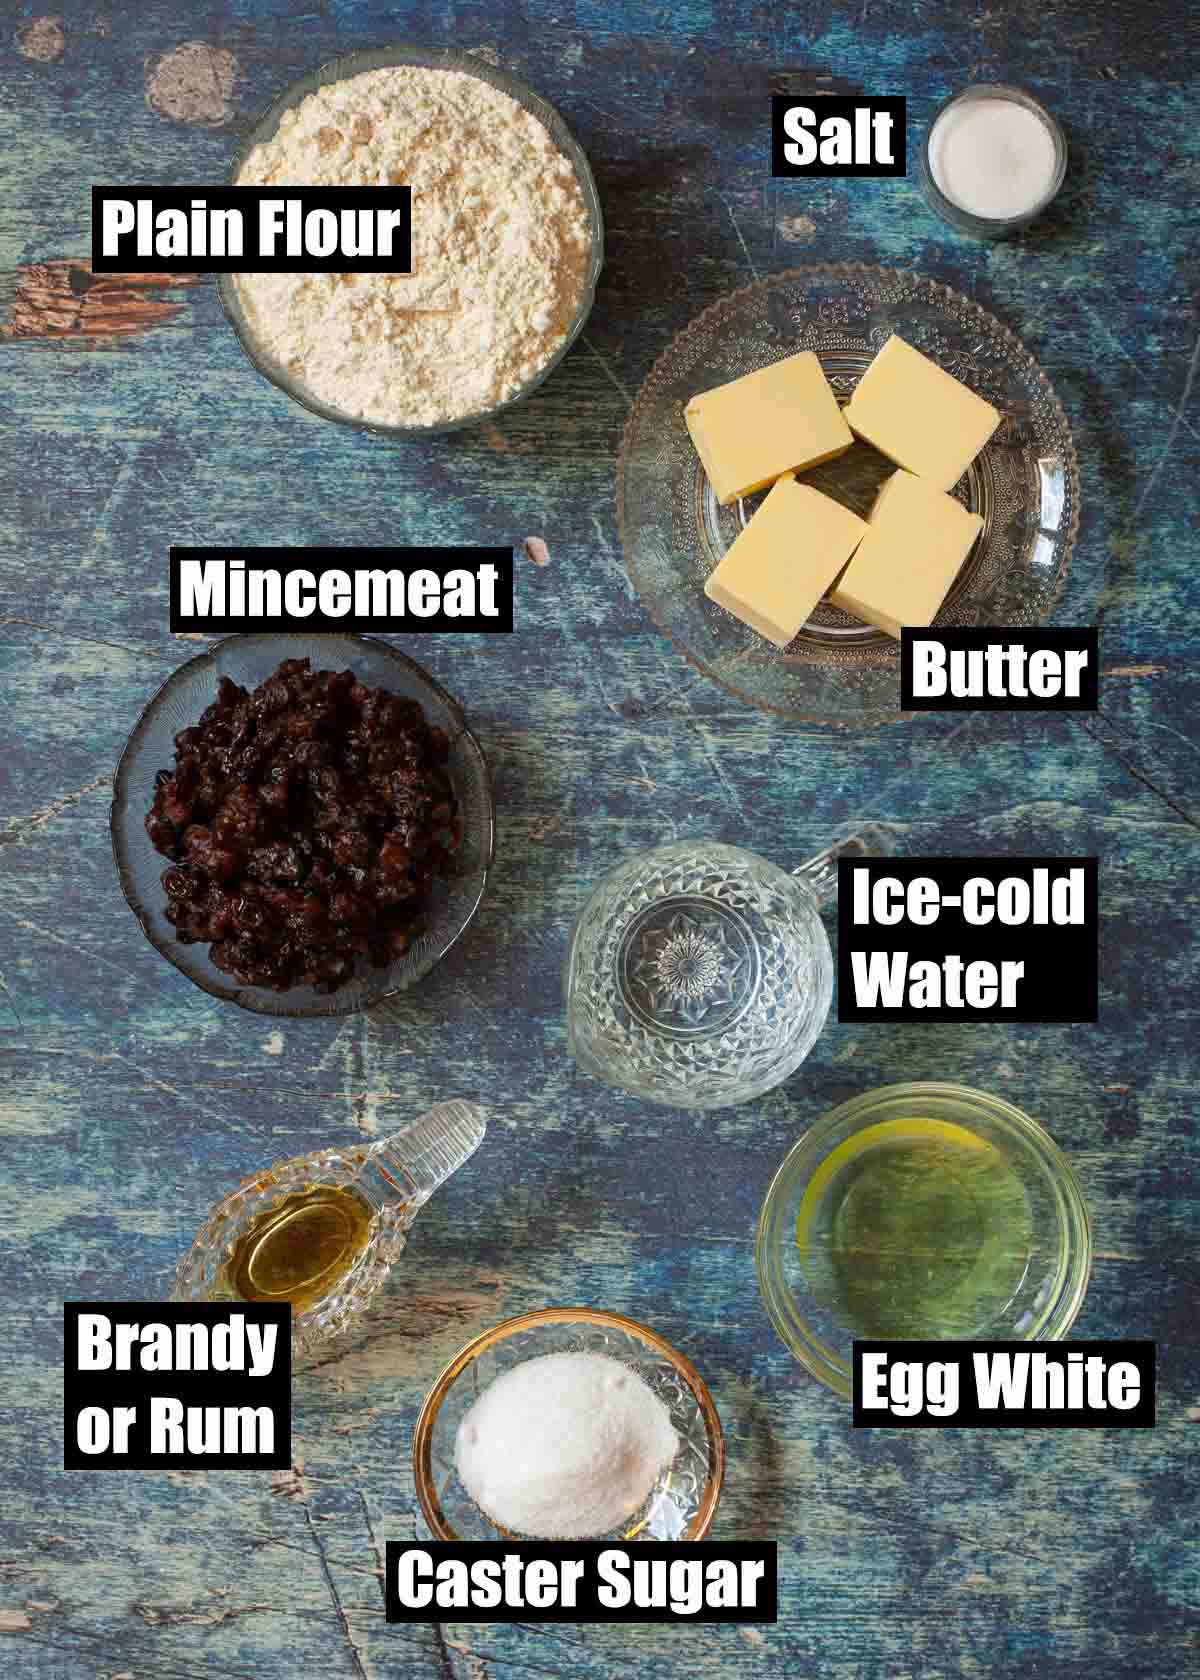 Labelled ingredients for mincemeat and puff pastry turnovers.